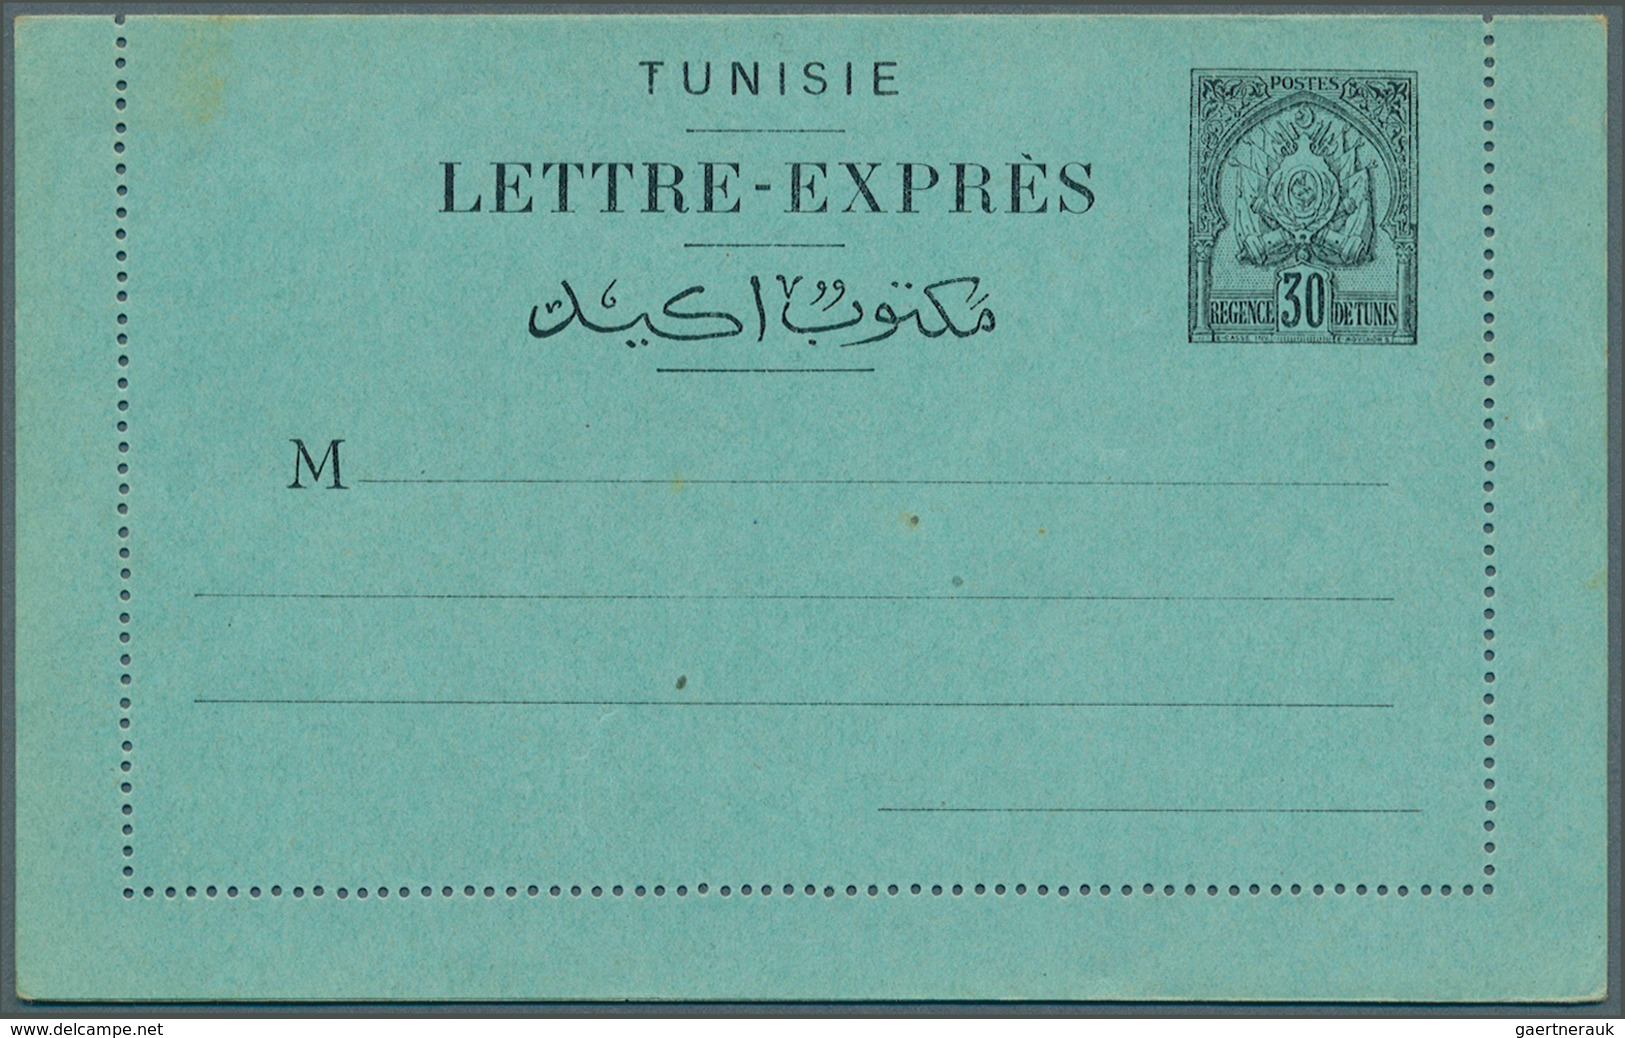 Tunesien: 1854 - 1965, over 230 covers, PPC and postal stationery's including two franked covers of